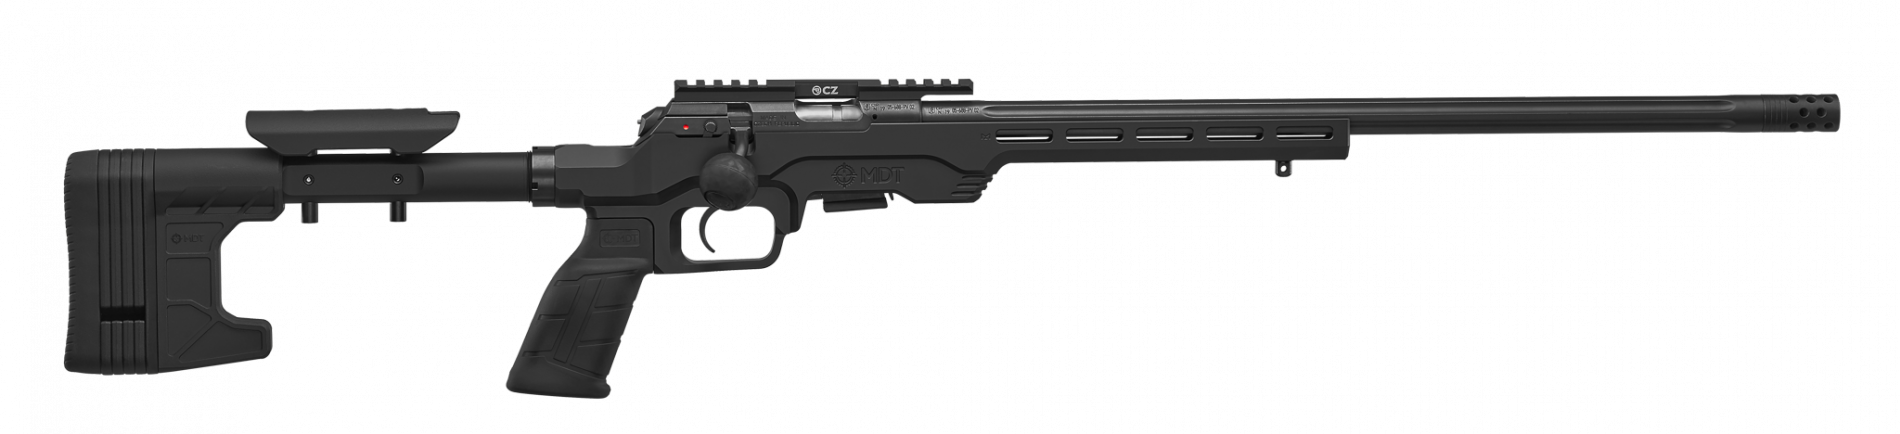 CZ 457 MDT Chassis